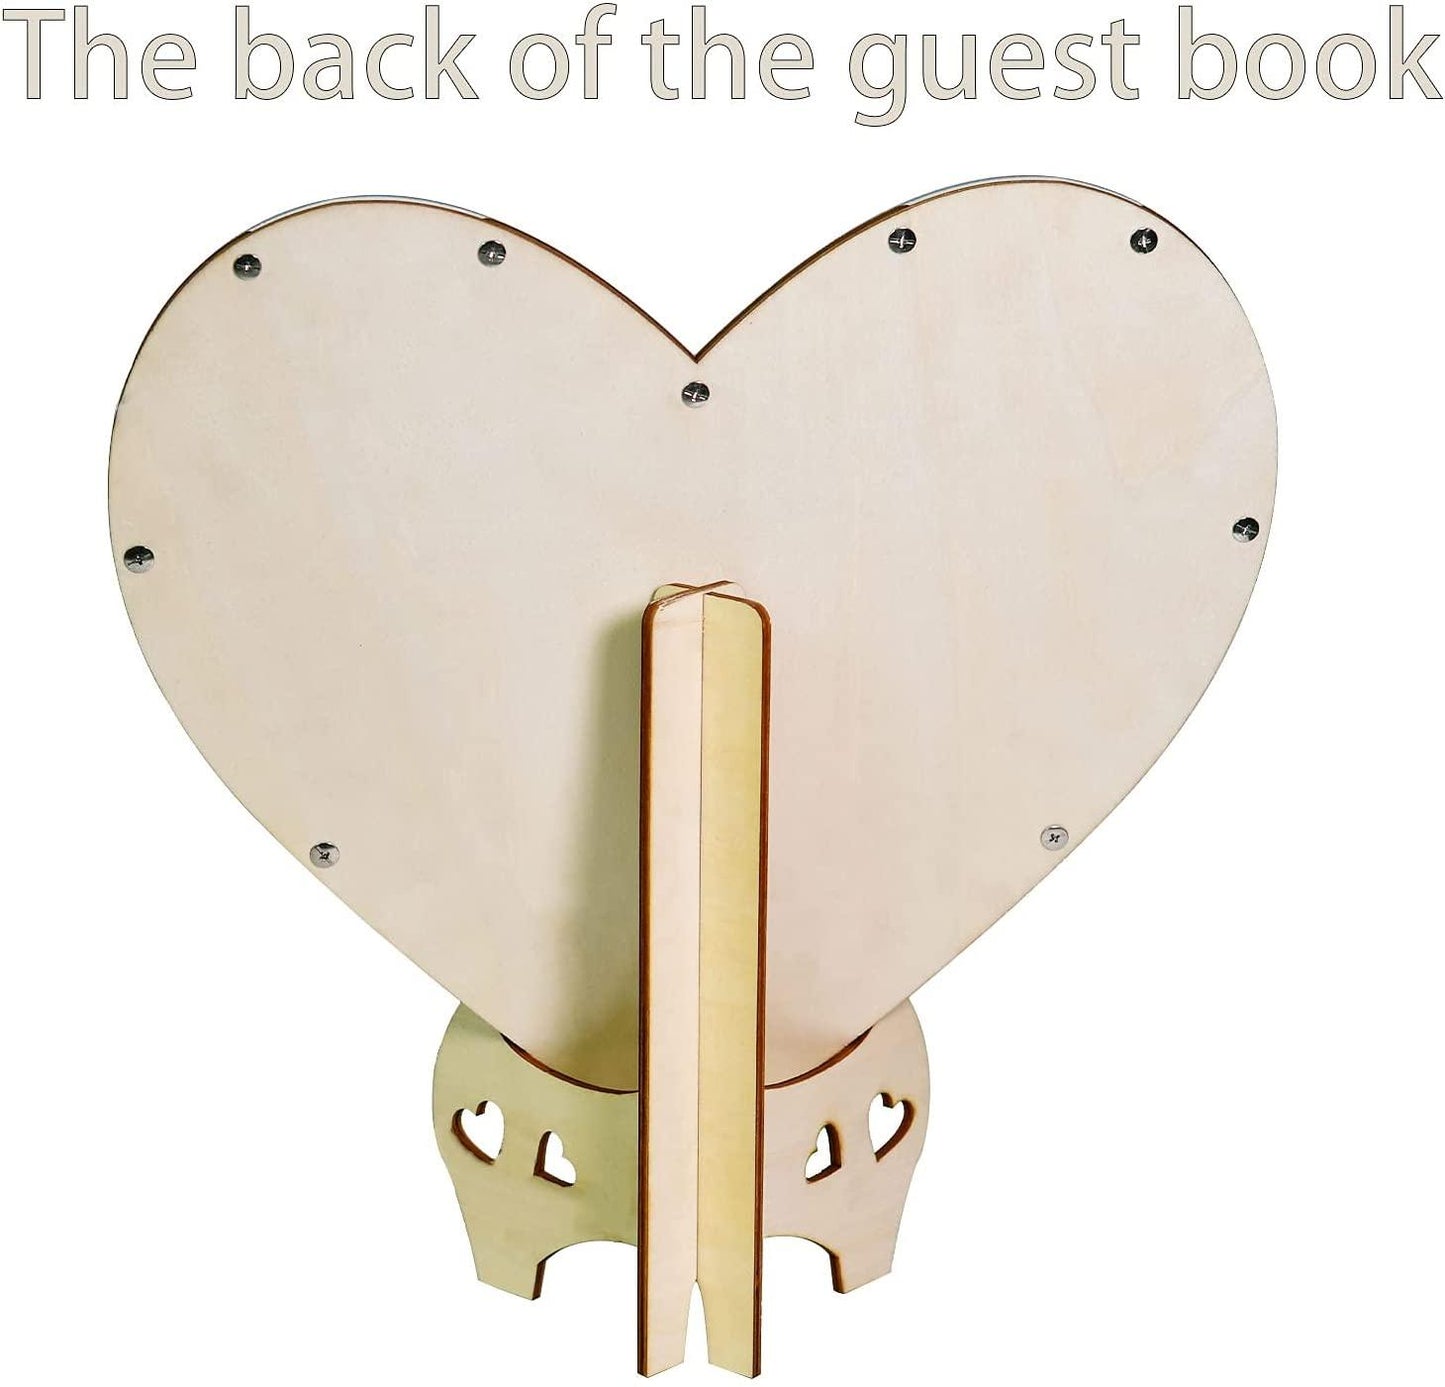 Wedding Guest Book Alternative, Wooden Frame with 75 Blank Hearts, Wooden Frame for Rustic Wedding Decorations - If you say i do